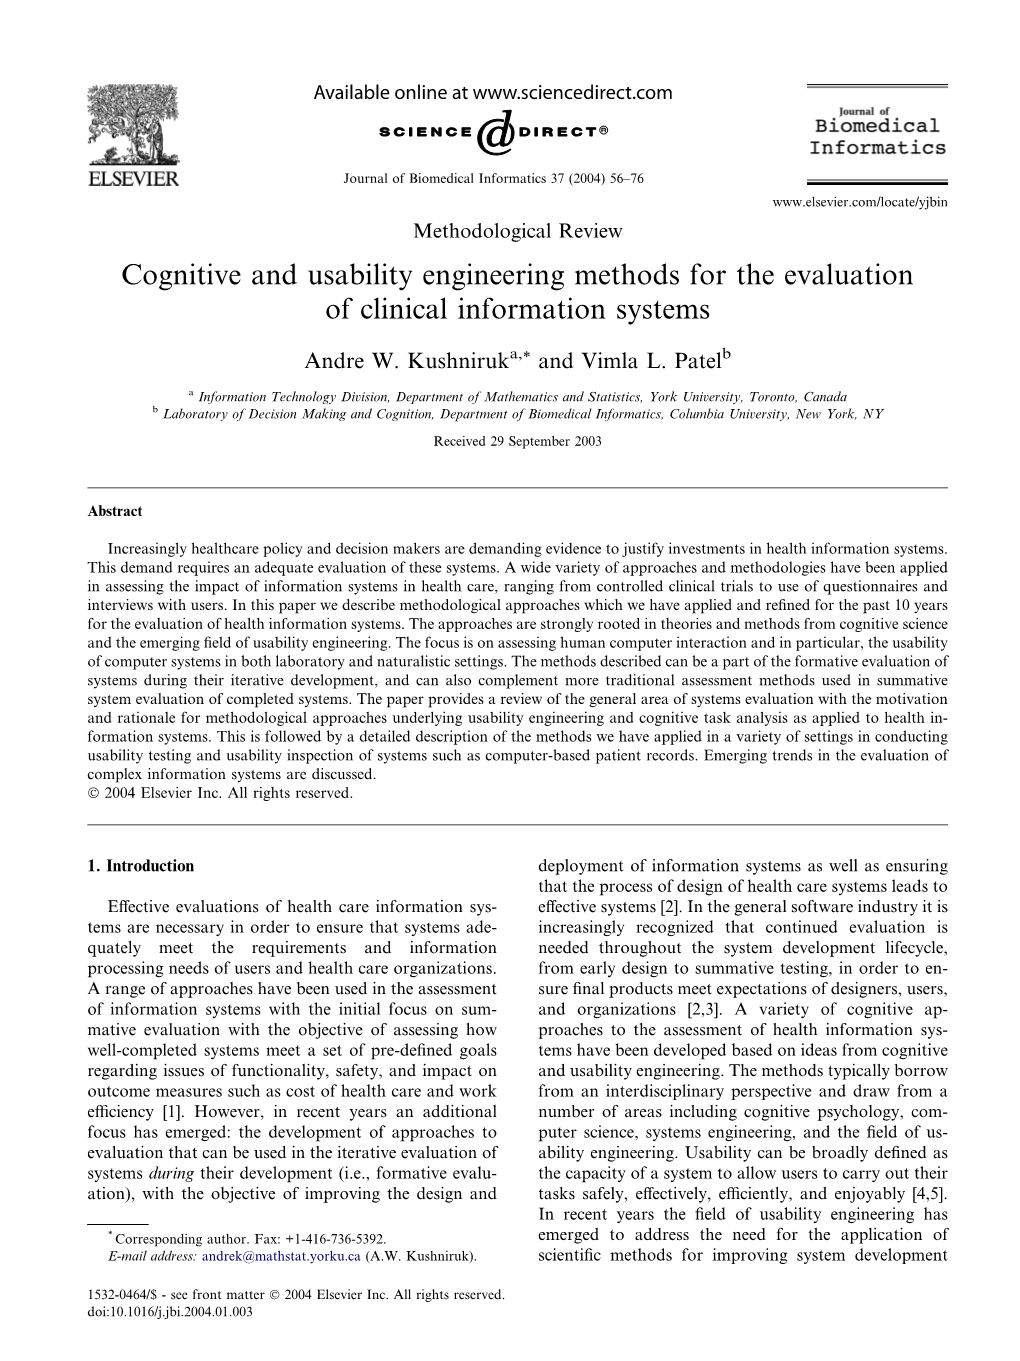 Cognitive and Usability Engineering Methods for the Evaluation of Clinical Information Systems